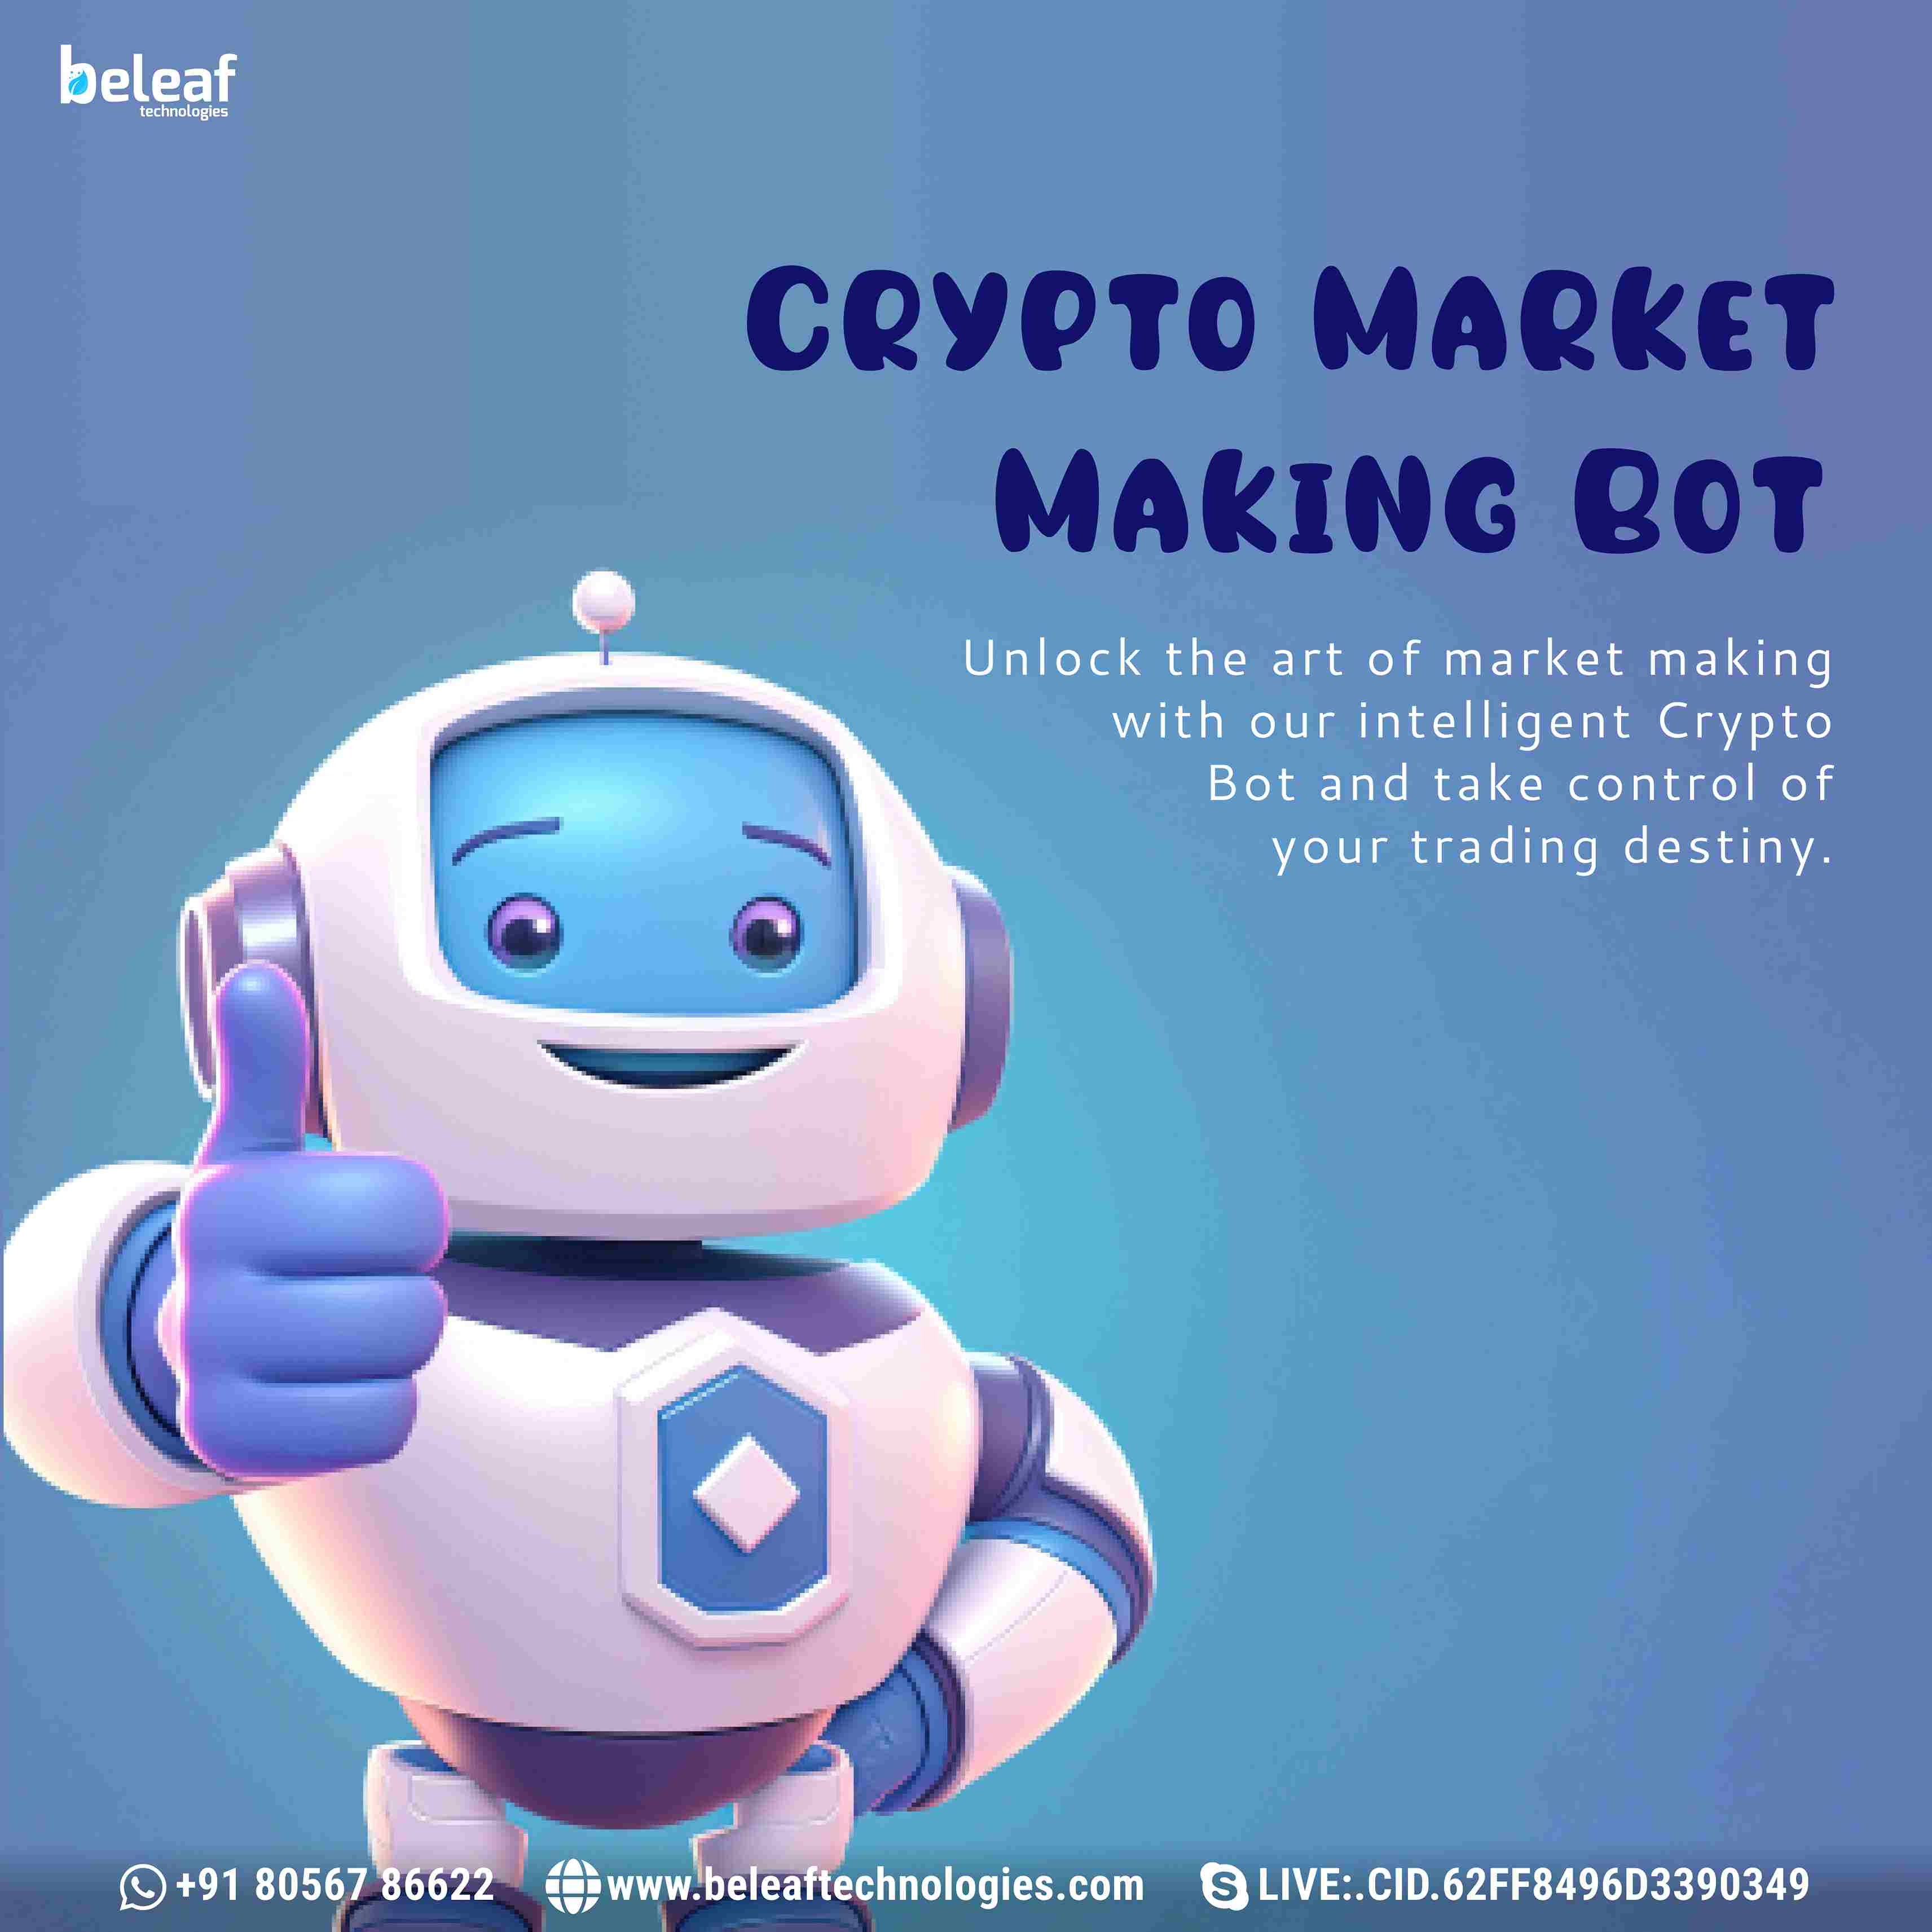 crypto market making bot development,Tagore Nagar,Business,Free Classifieds,Post Free Ads,77traders.com